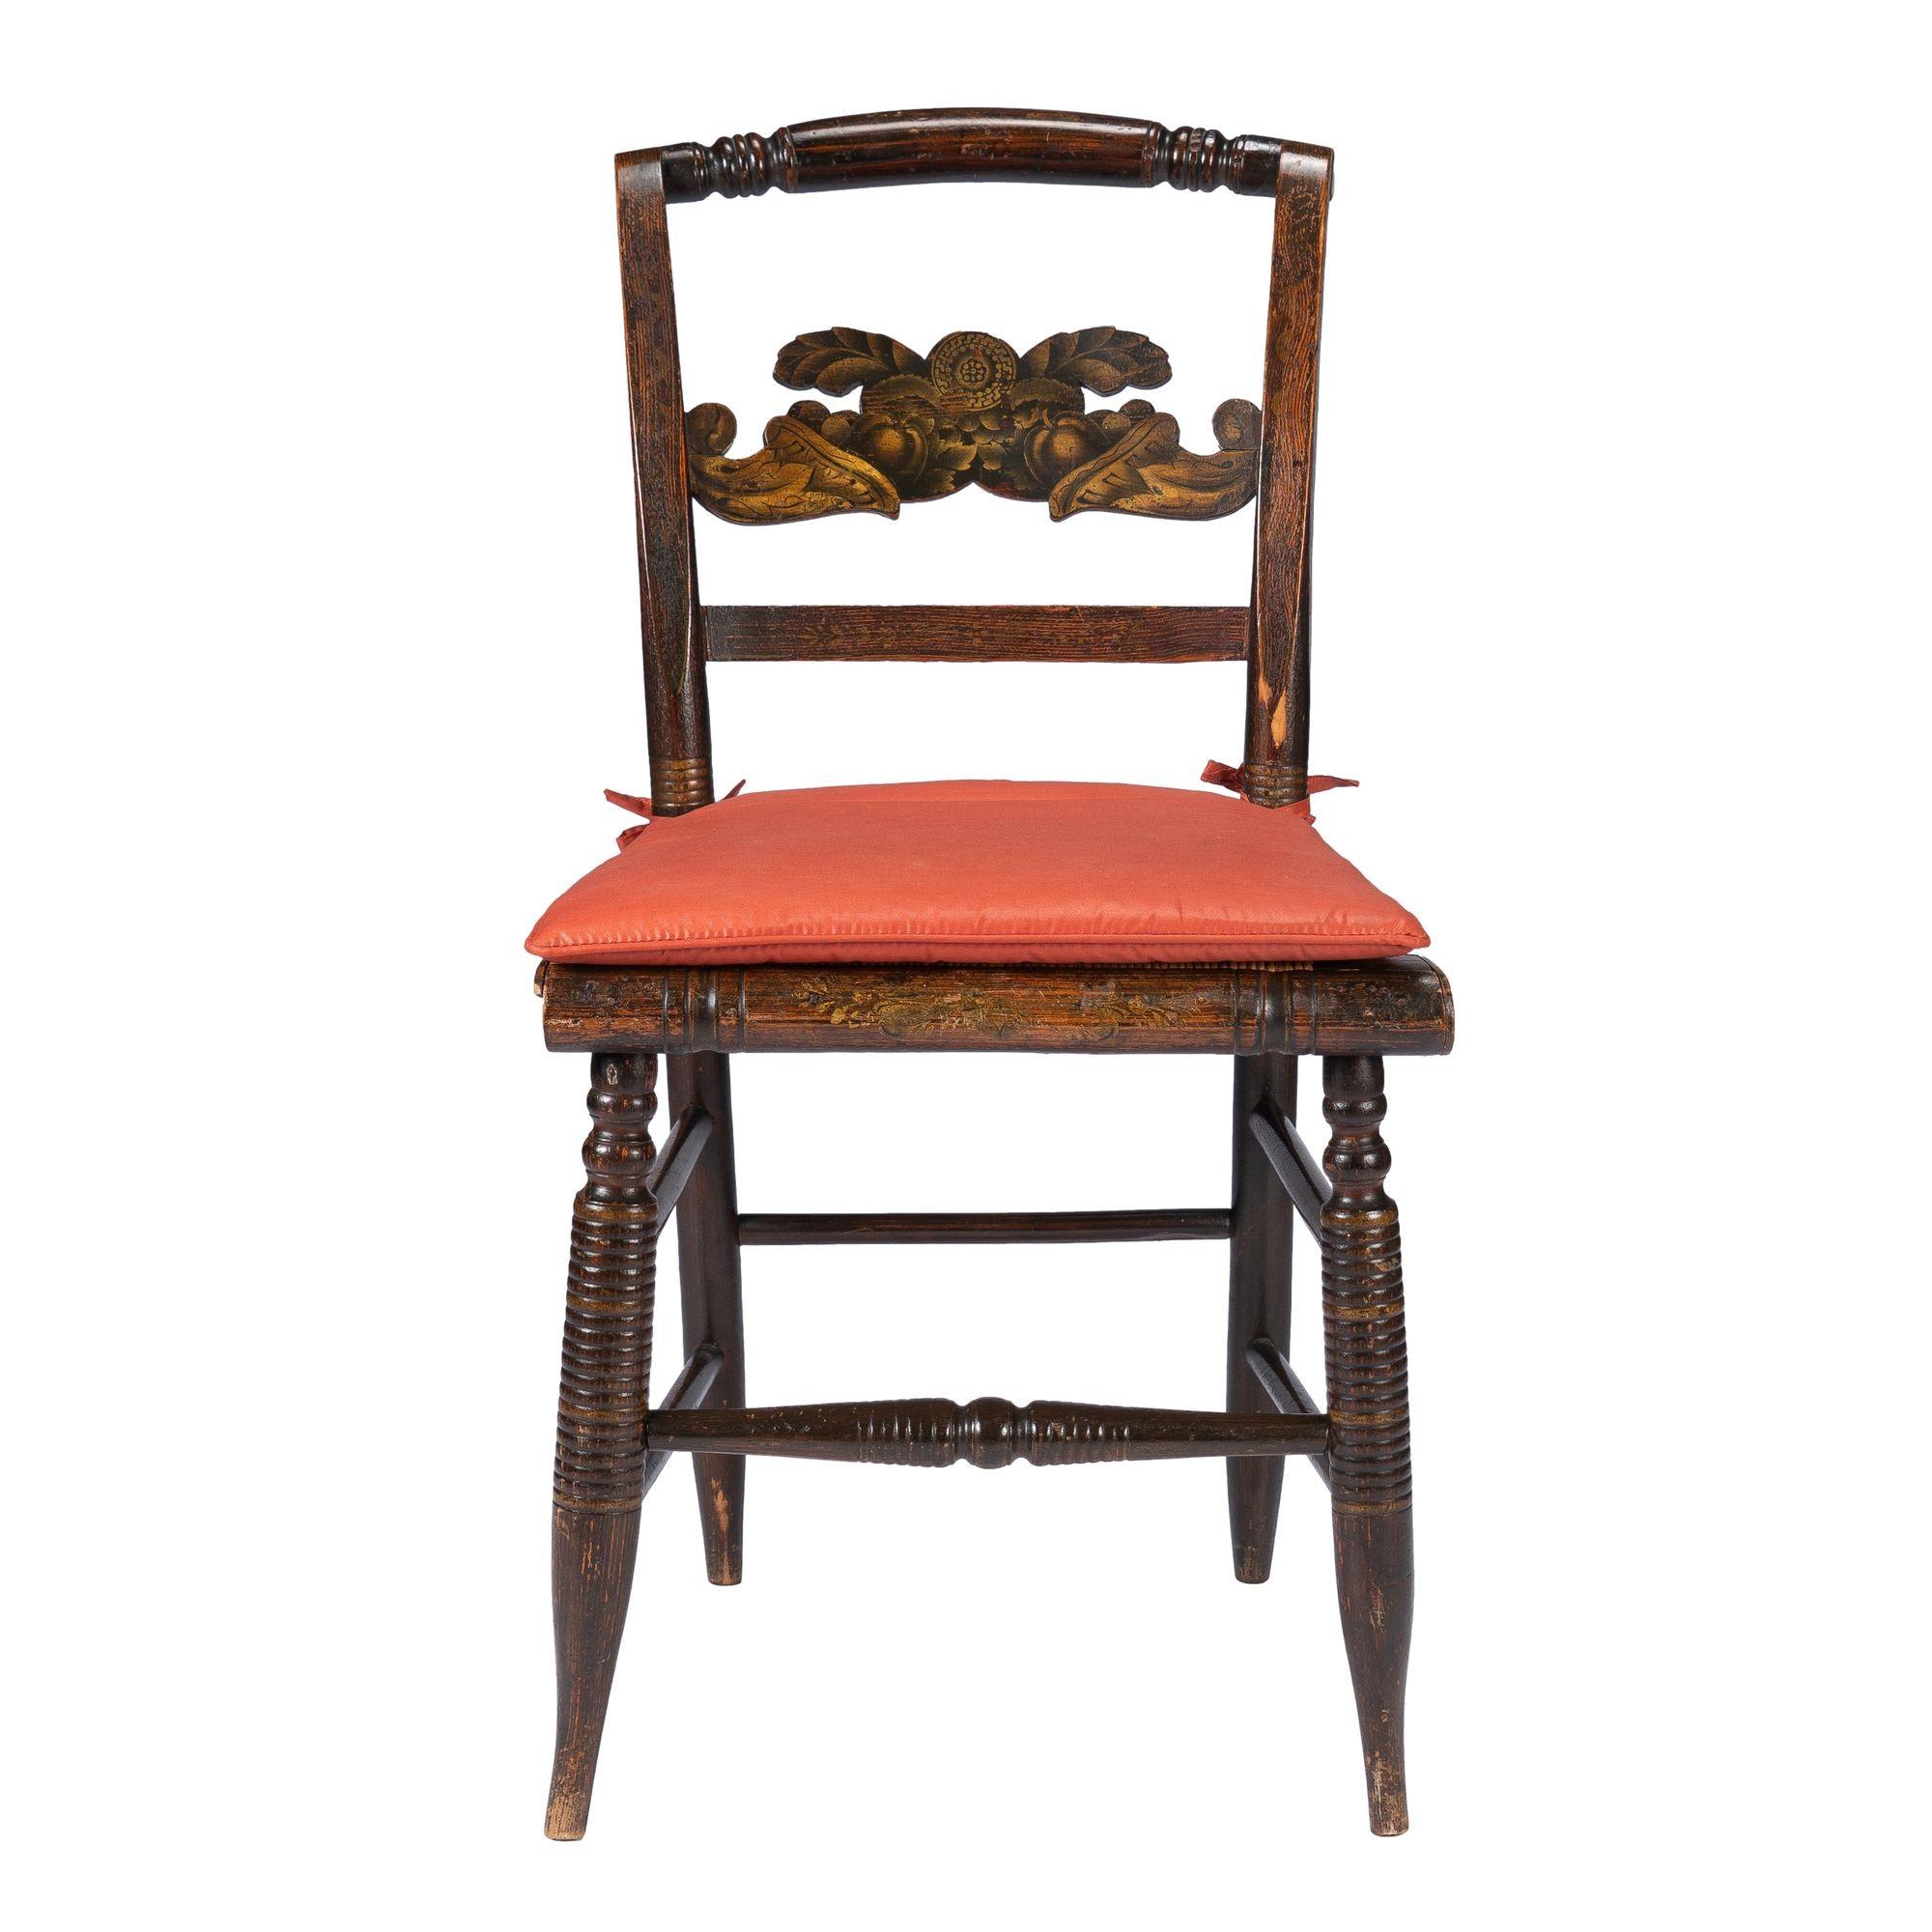 American Hitchcock rush seat side chair with a tie-on seat cushion. The chair features the original gilt and bronze powder stencil decoration on the double cornucopia back splat as well as a faded floral motif on the front seat rail. The rush seat